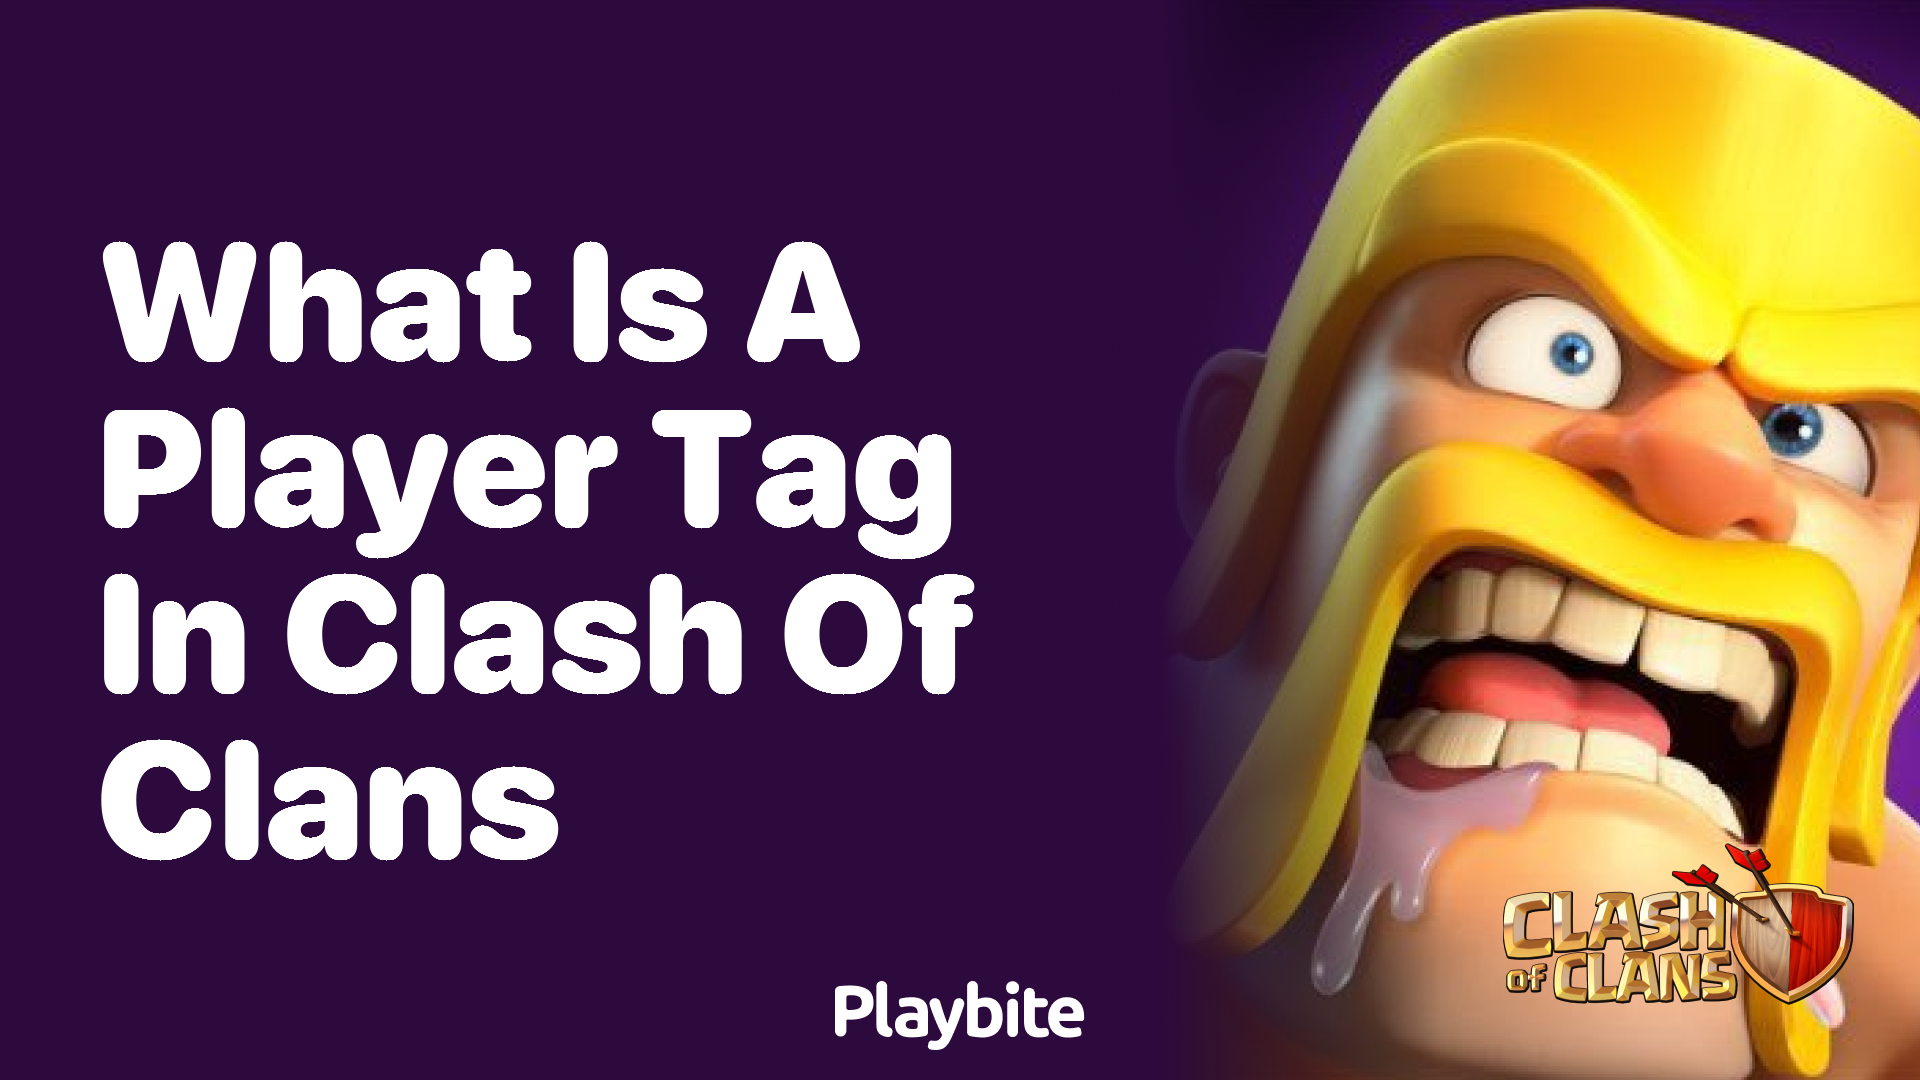 What Is a Player Tag in Clash of Clans?